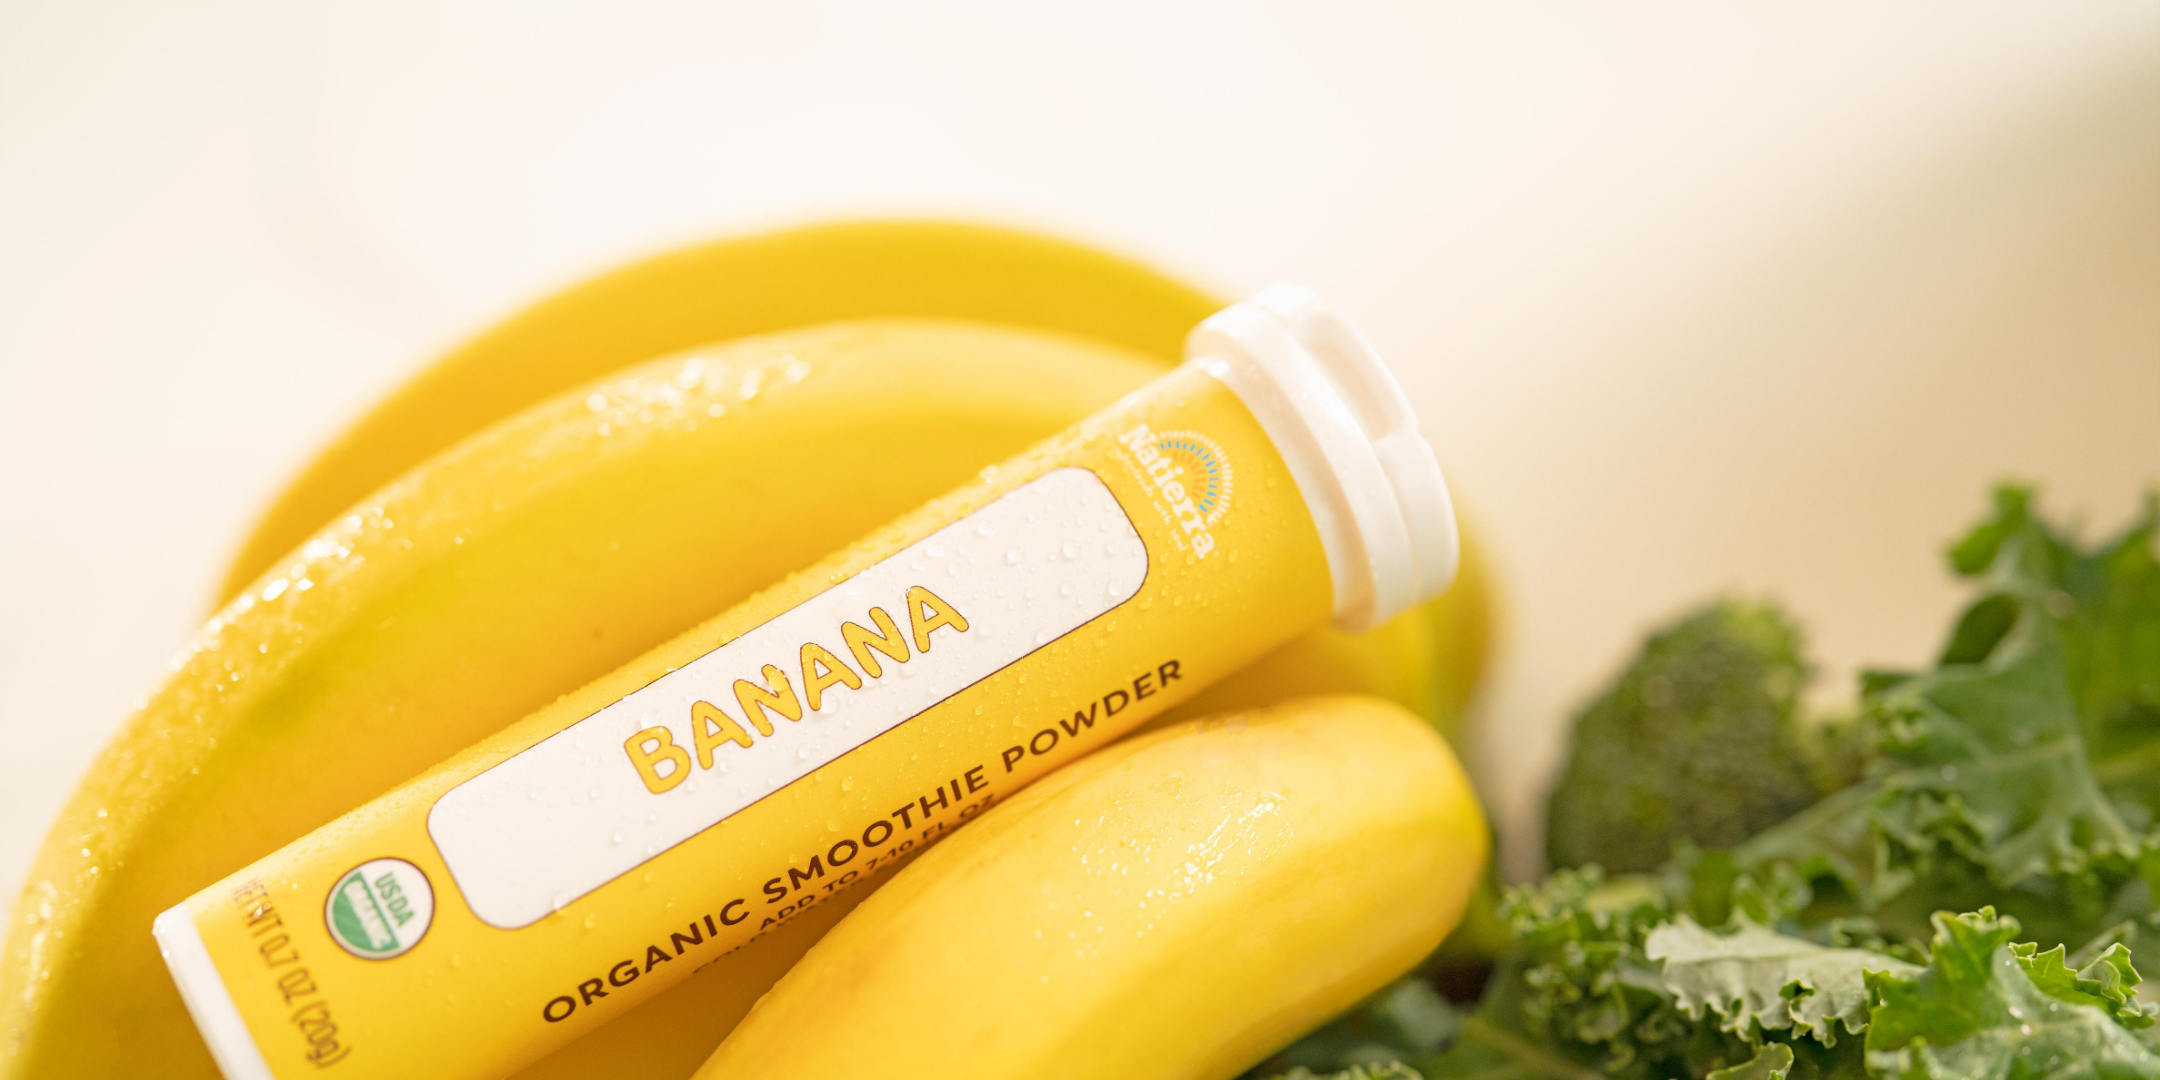 Banana Smoothie tube and Bananas and leaf lettuce